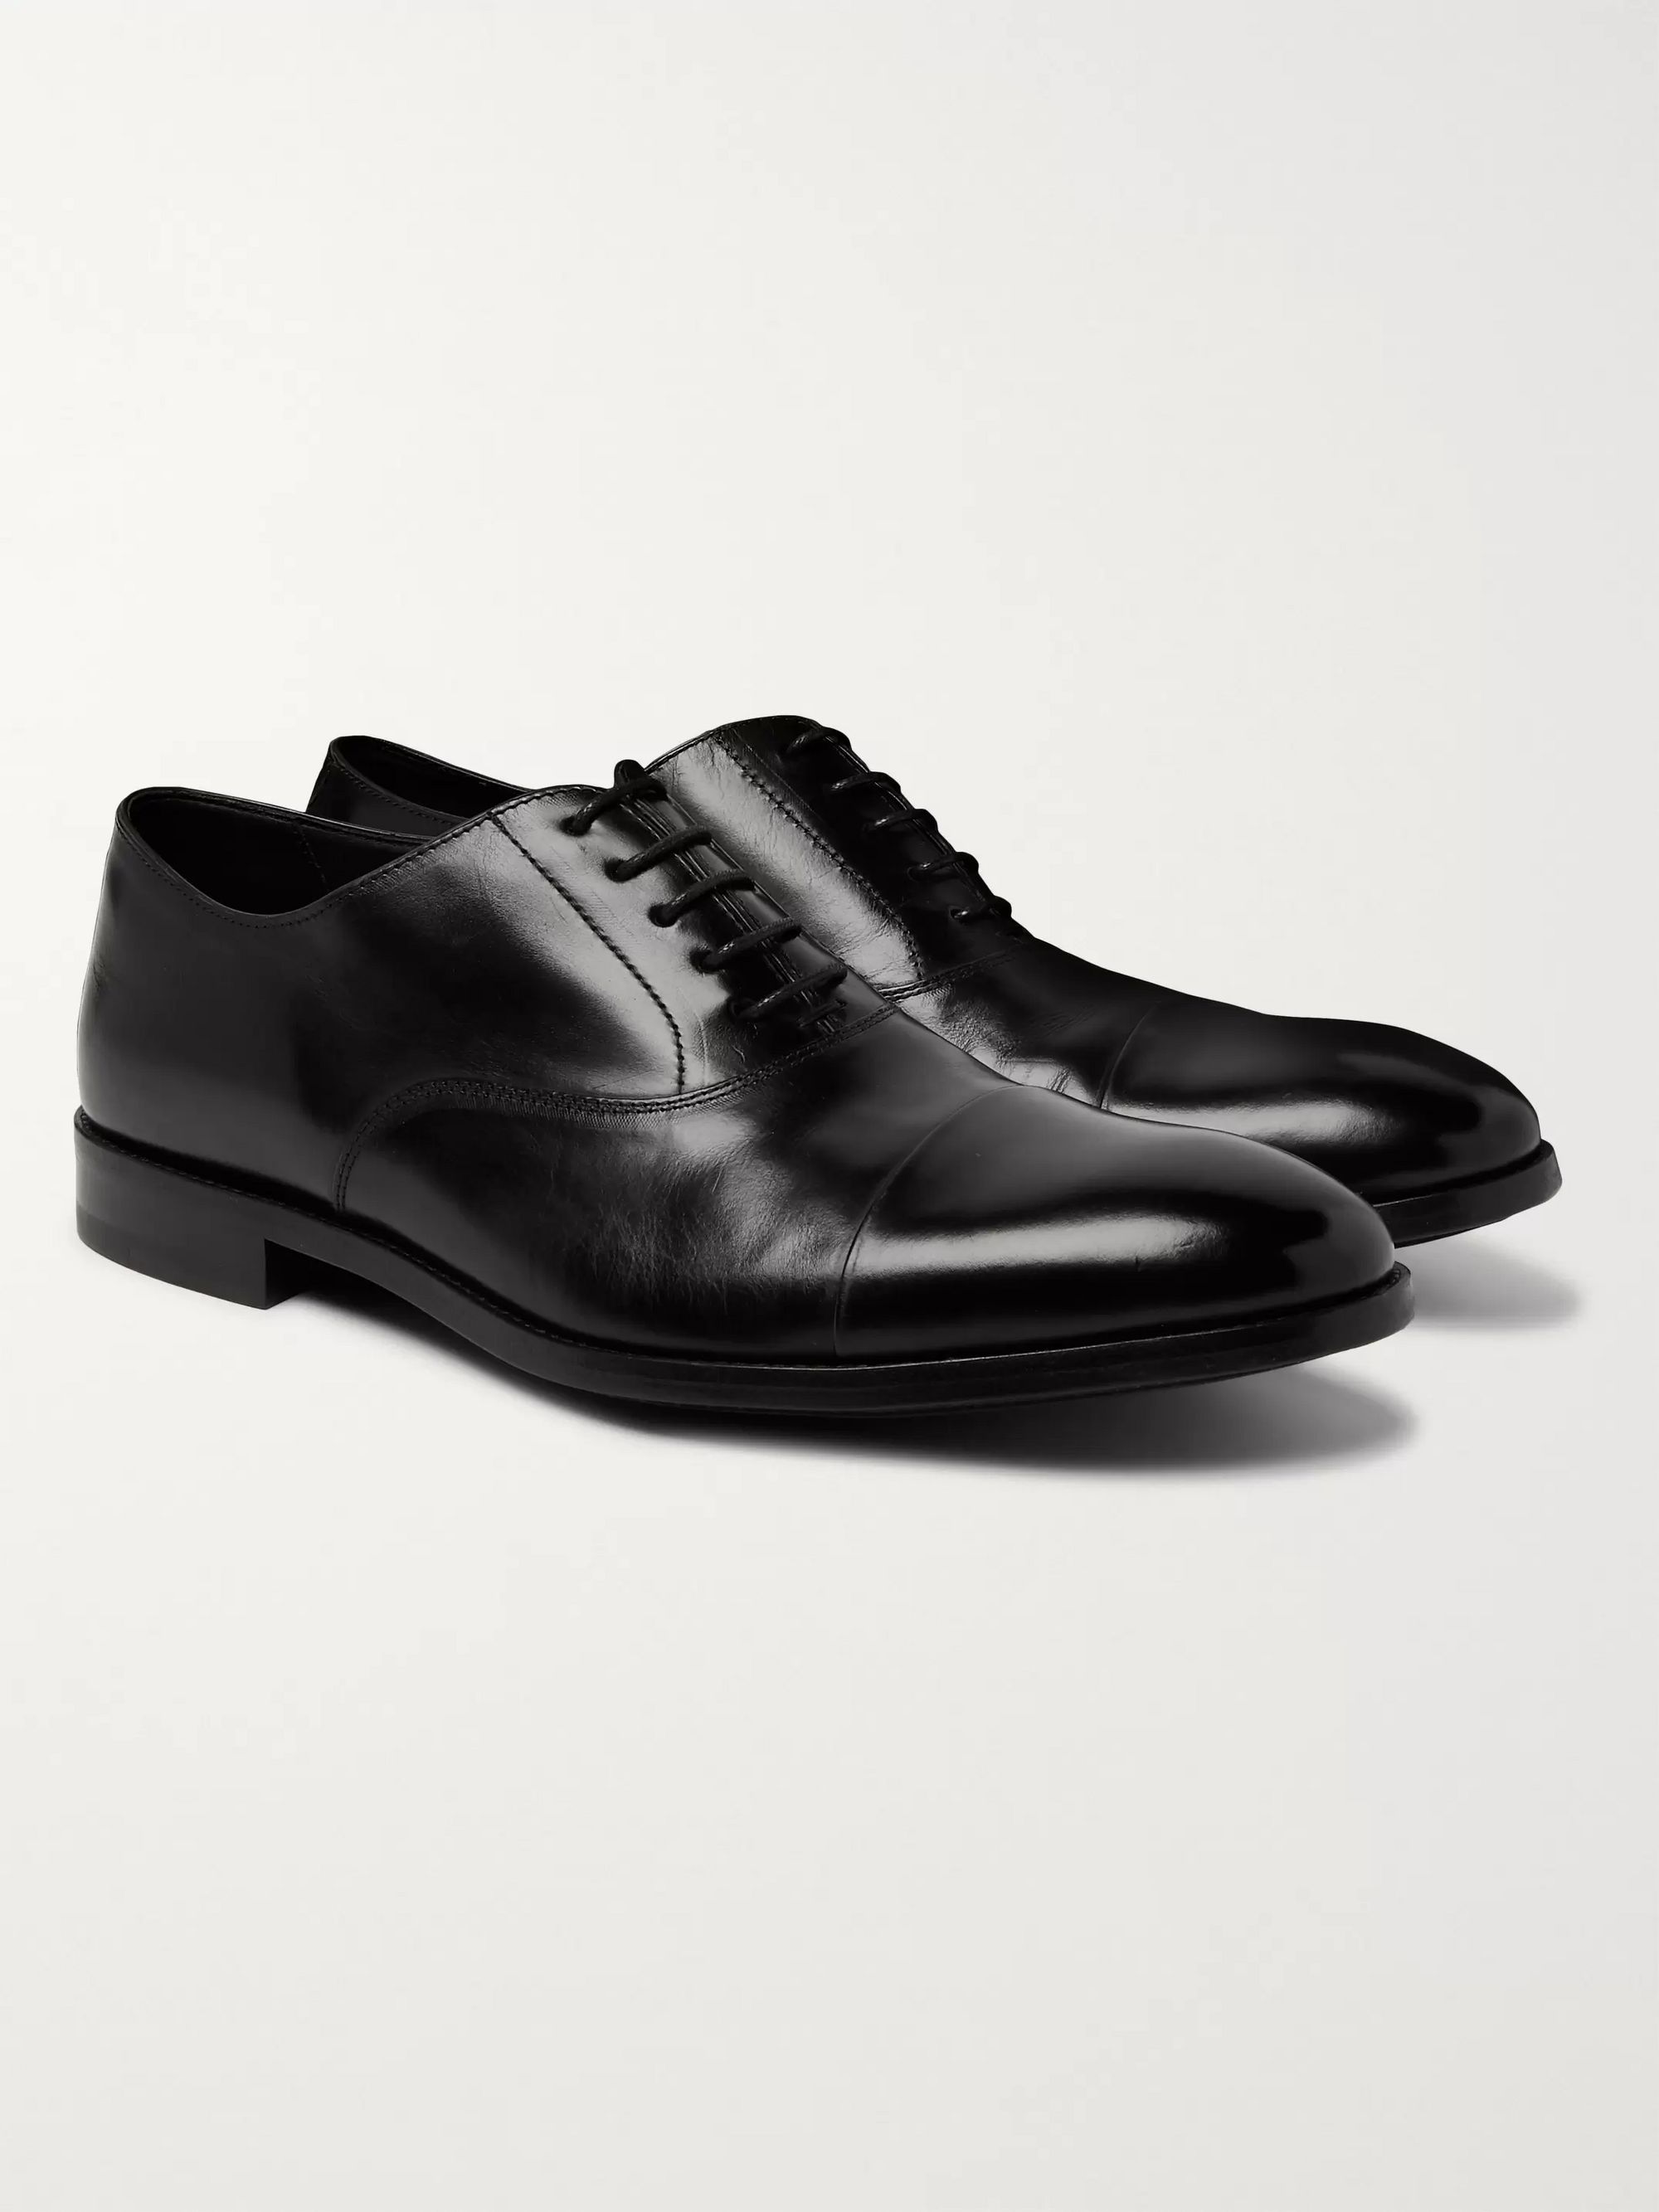 paul smith oxford shoes cheap online